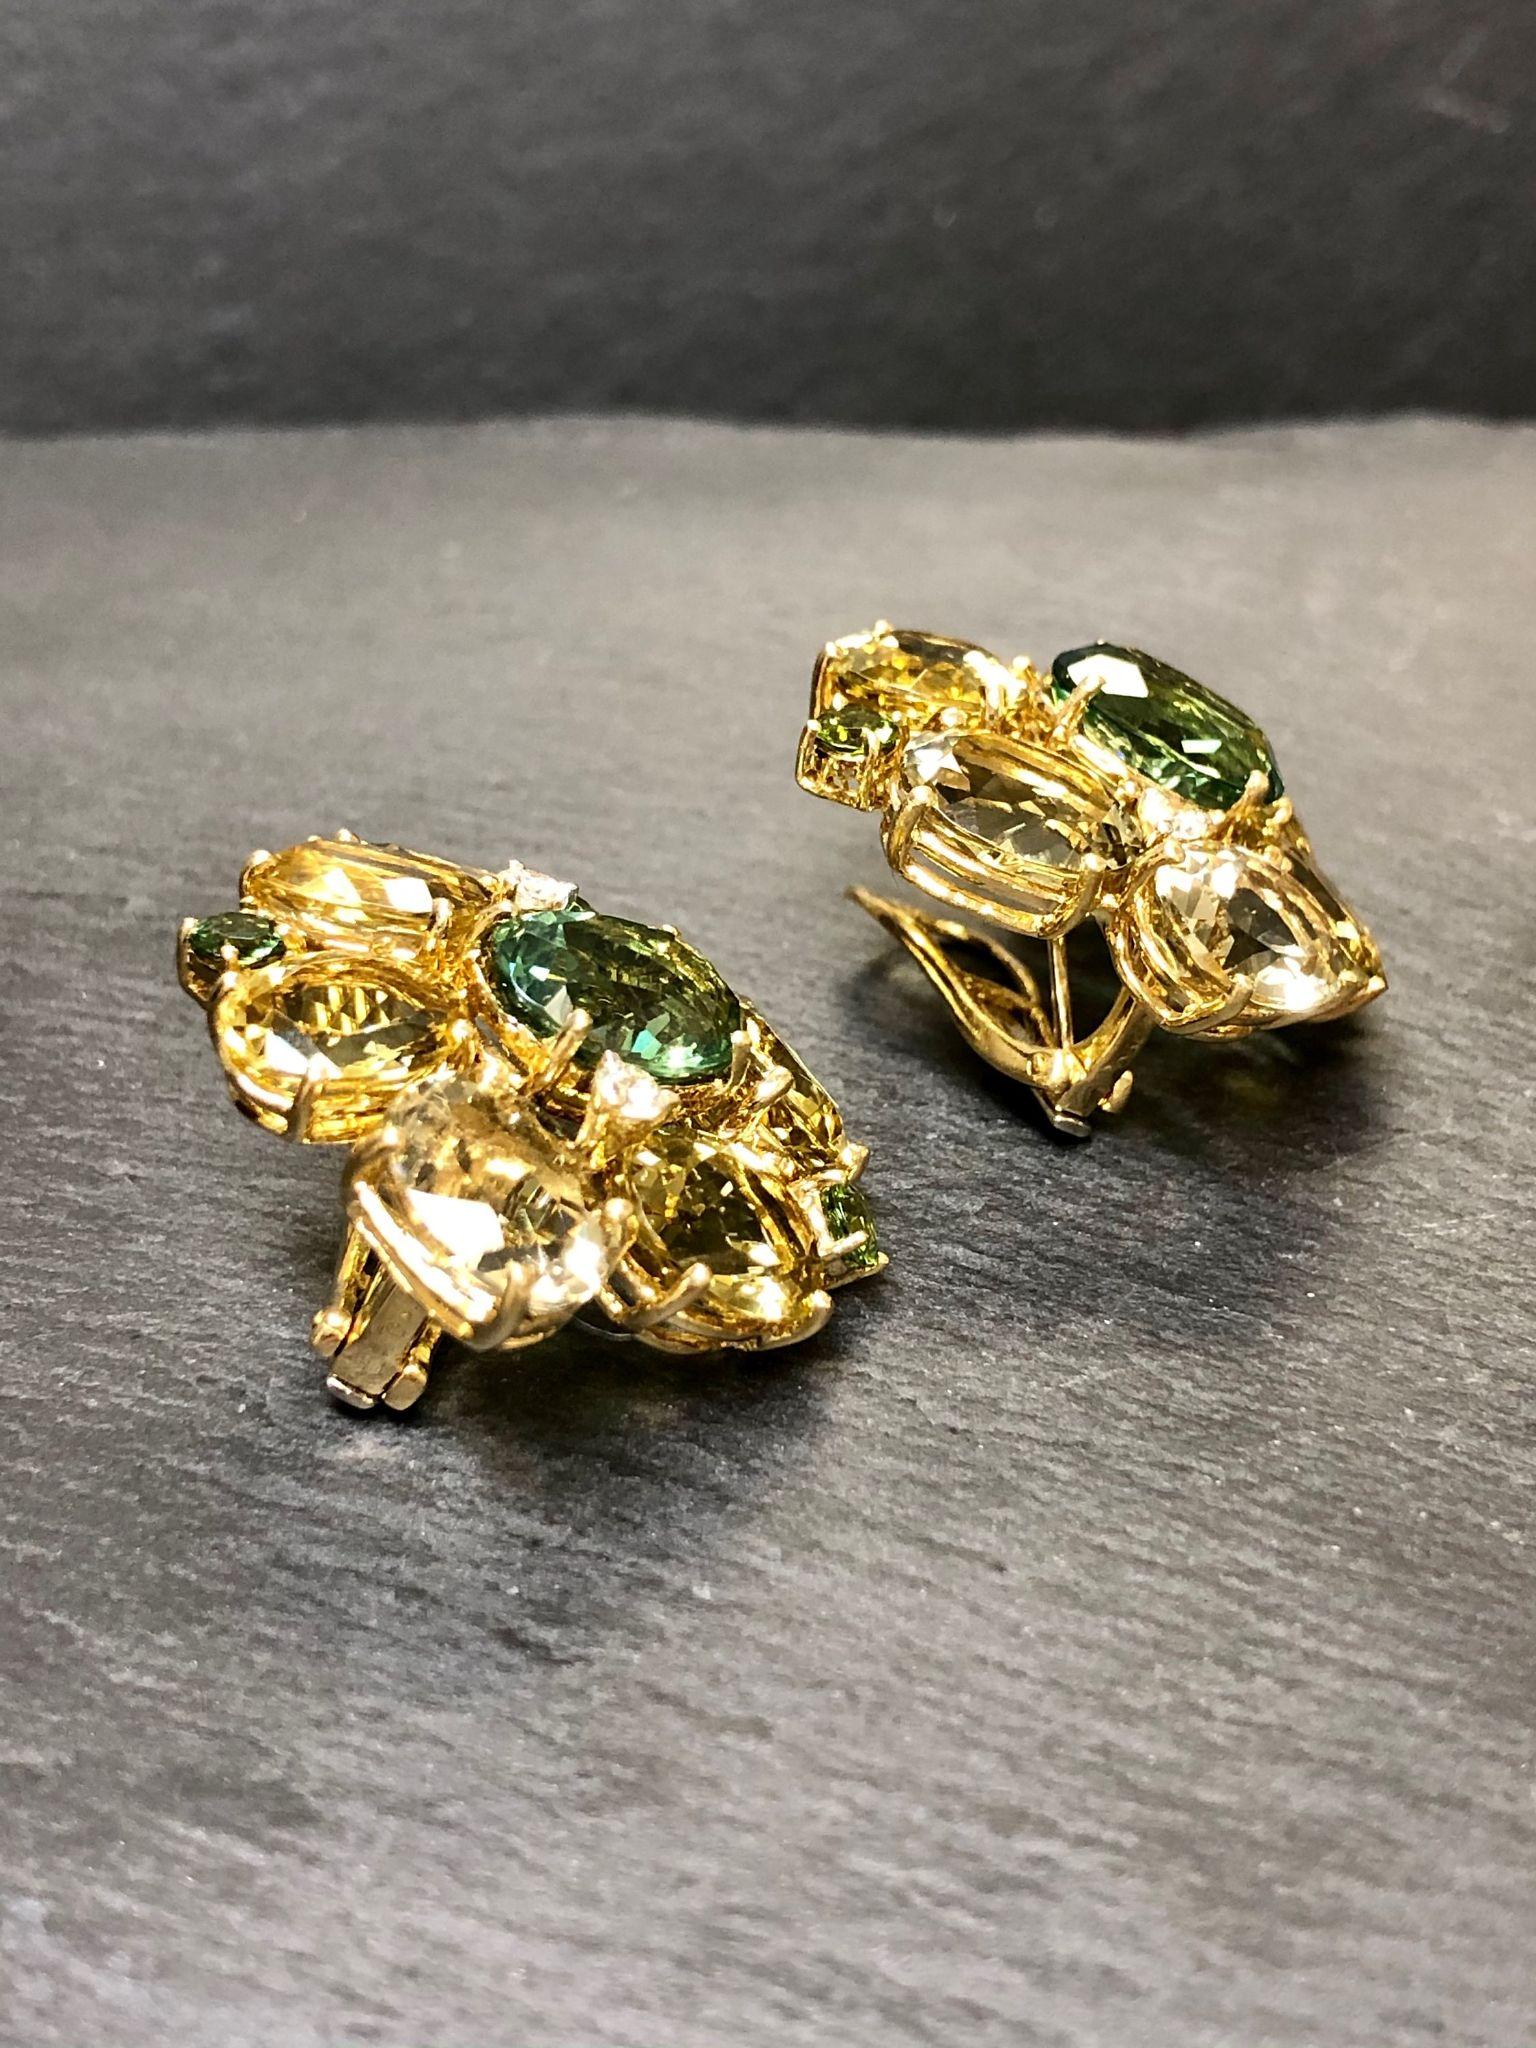 A large pair of statement earrings done in 18K yellow gold and set with various sized citrine, peridot and green quartz gemstones as well as .40cttw in G-H Vs clarity diamonds. These earrings are matched to a gorgeous cocktail ring also located on